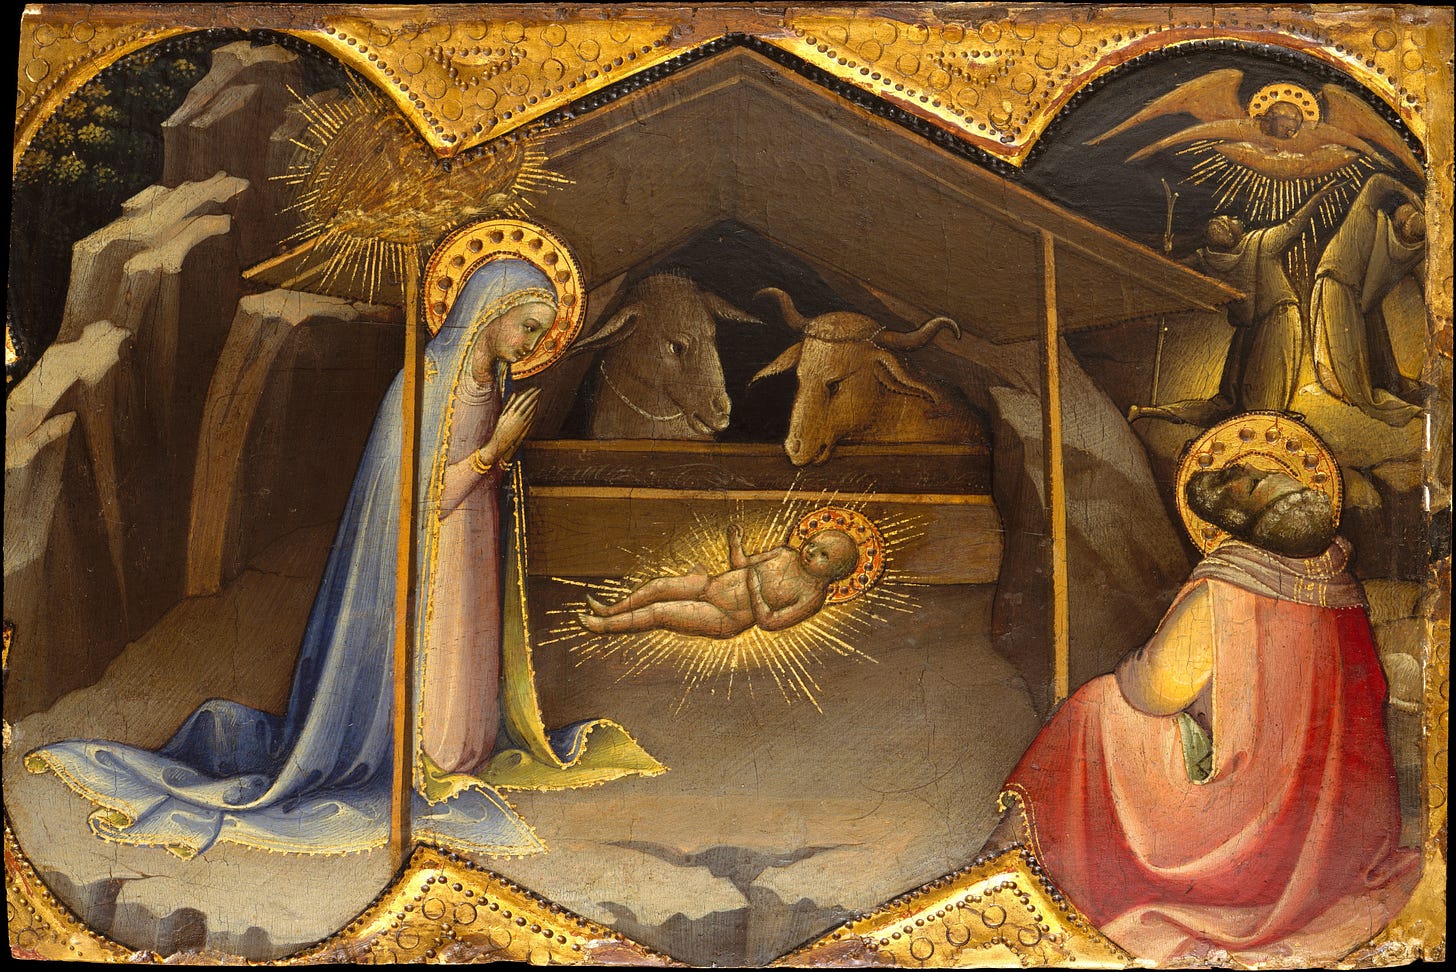 Lorenzo Monaco's The Nativity, showing Mary and Joseph before a floating, shimmering Baby Christ.